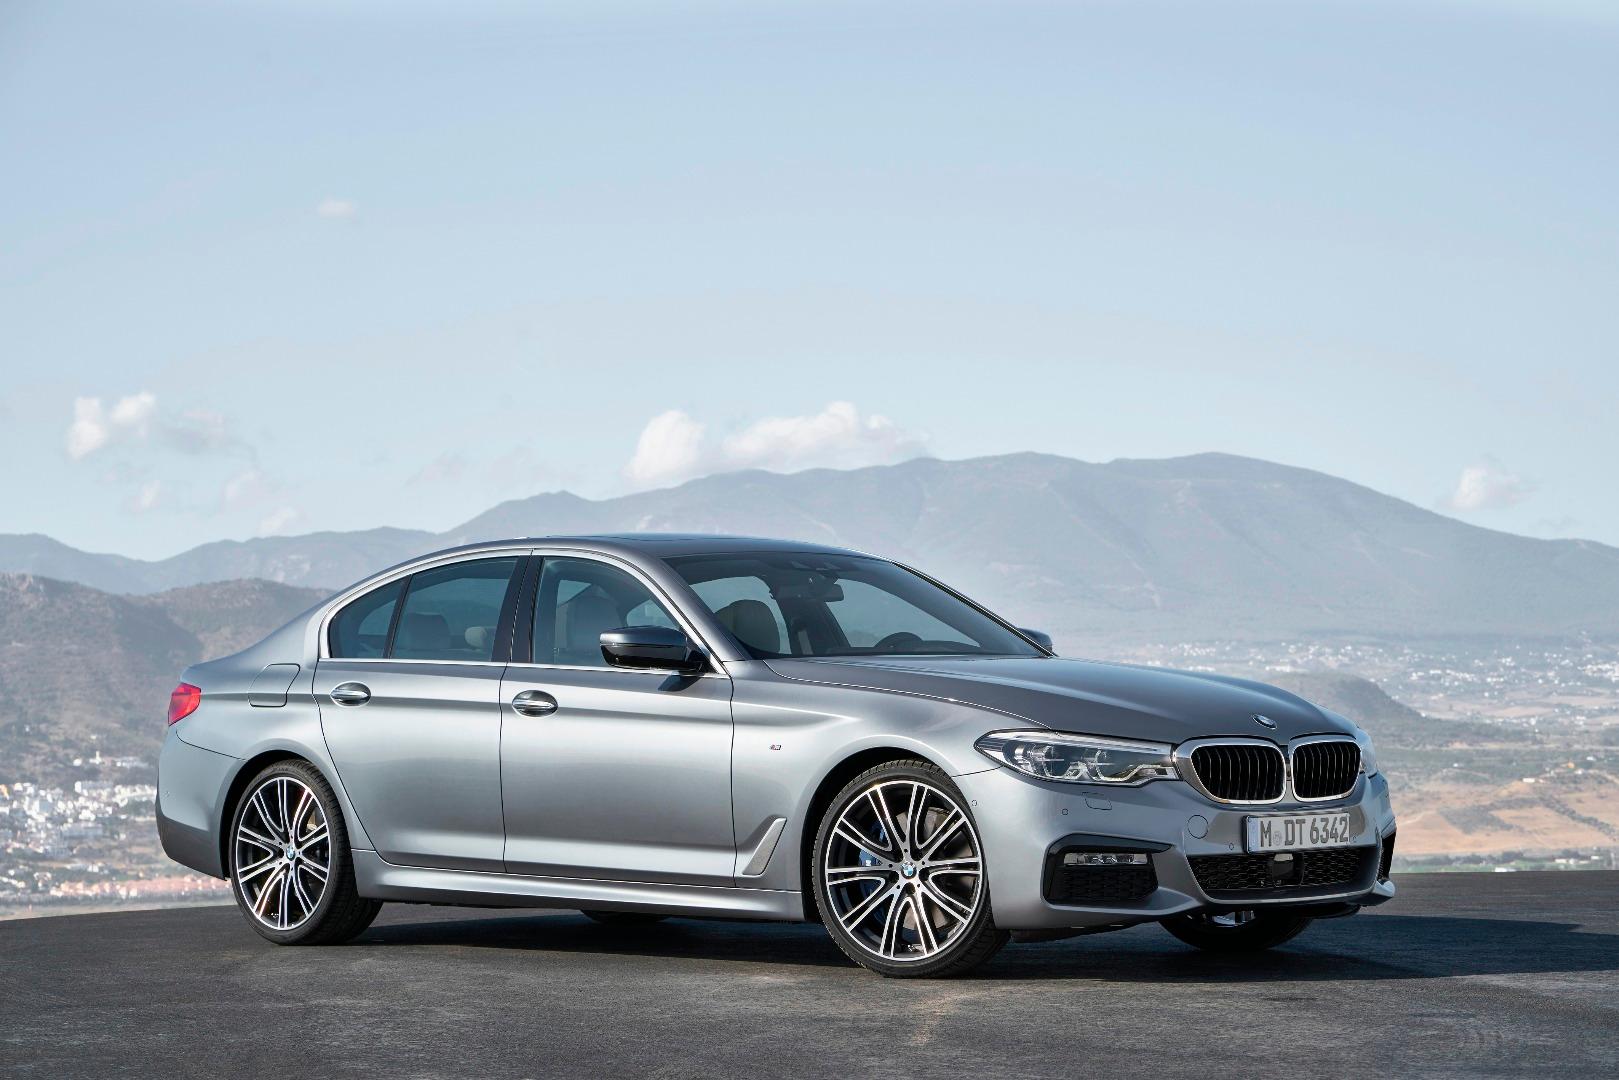 Review: 2017 BMW 530i is a showcase of excellence